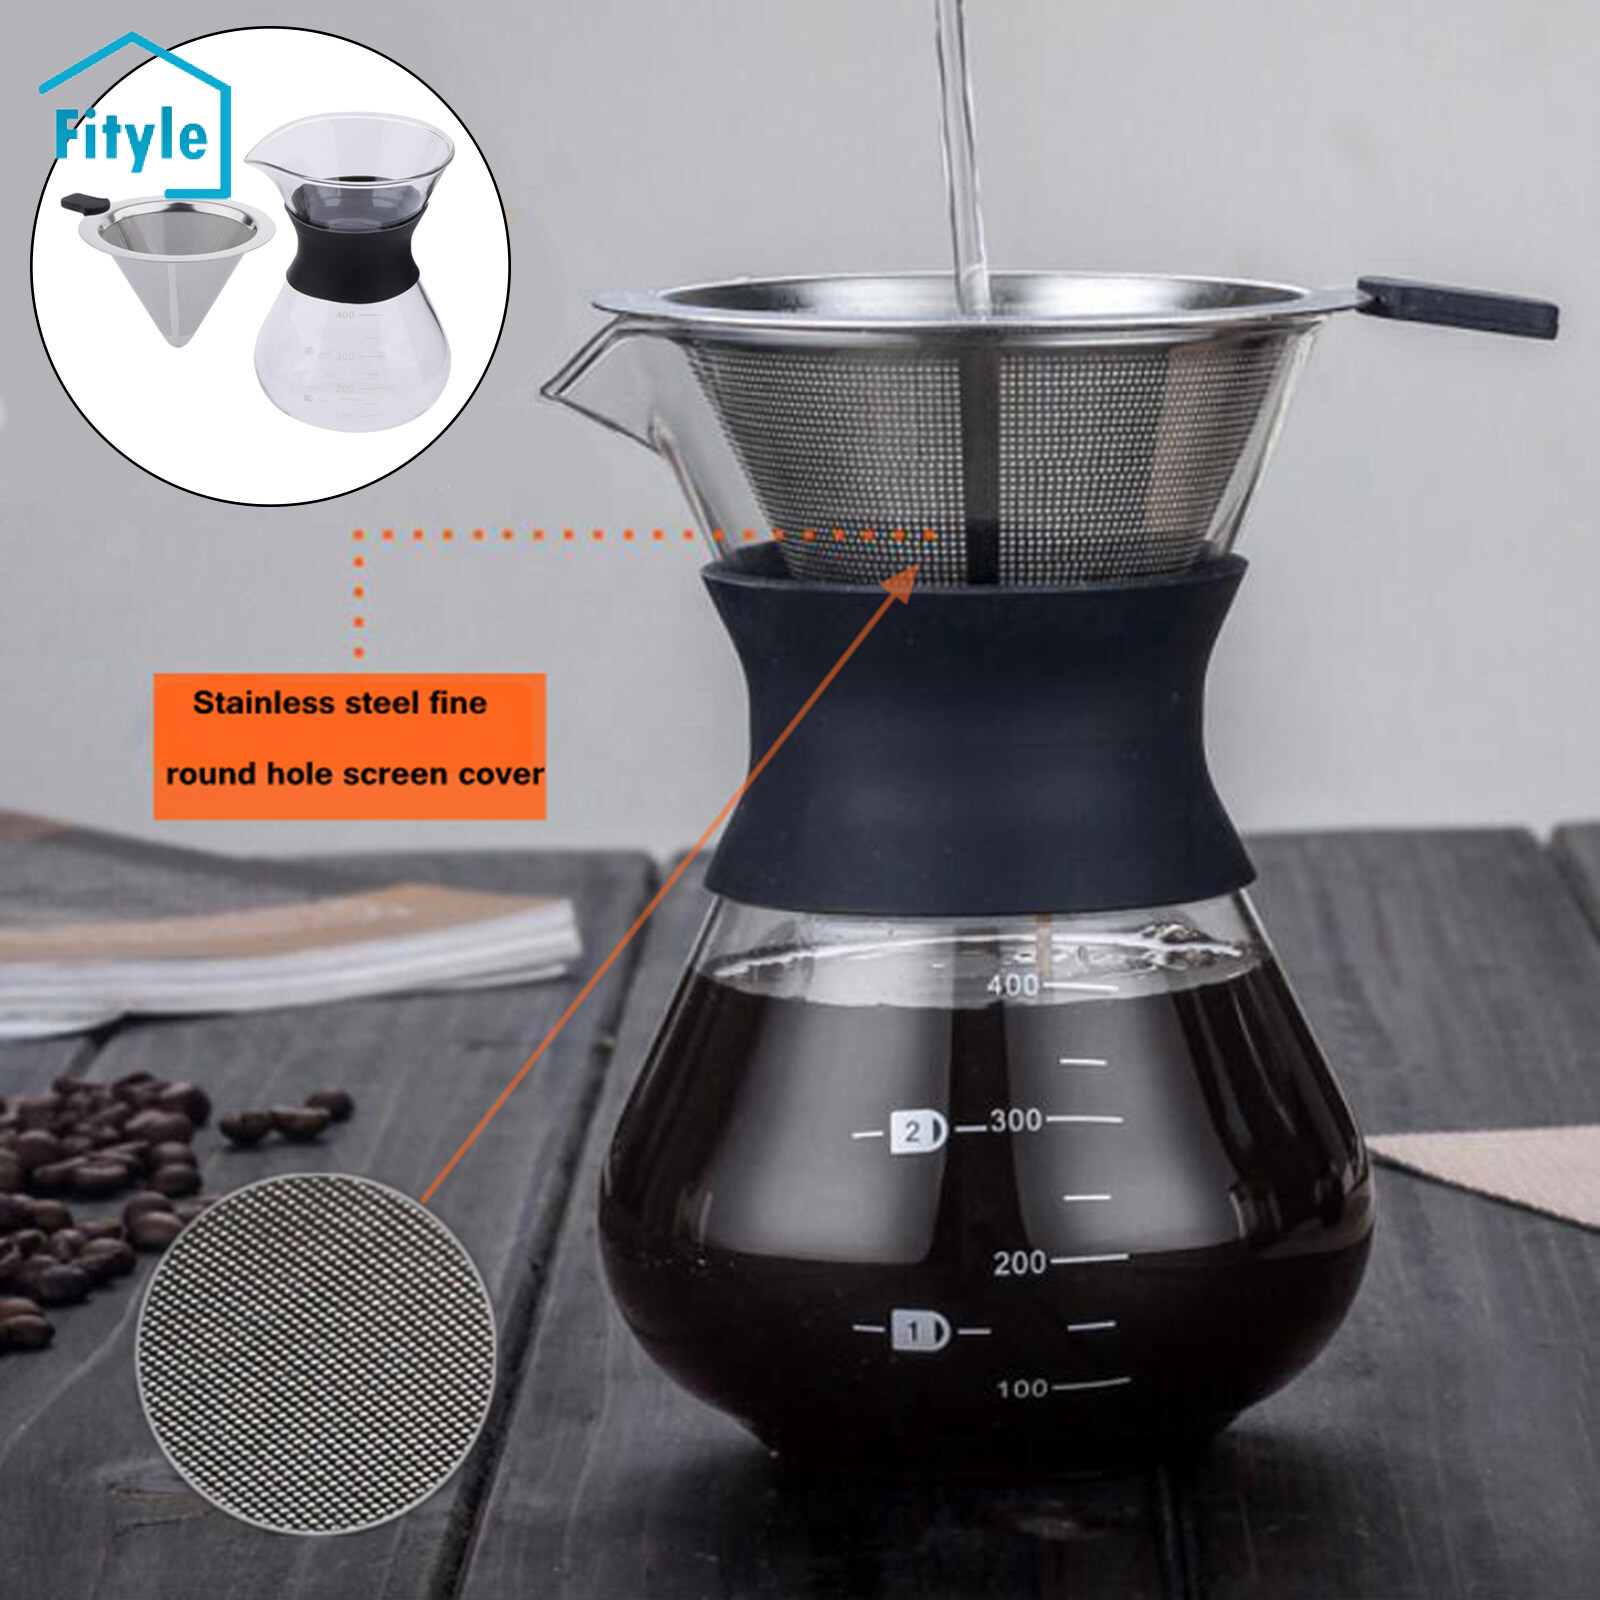 Pour Over Coffee Maker, Glass Coffee Pot Coffee Brewer with Stainless Steel Filter, High Heat Resistance Decanter, 14 Ounce -, Size: 15x9.5x6cm